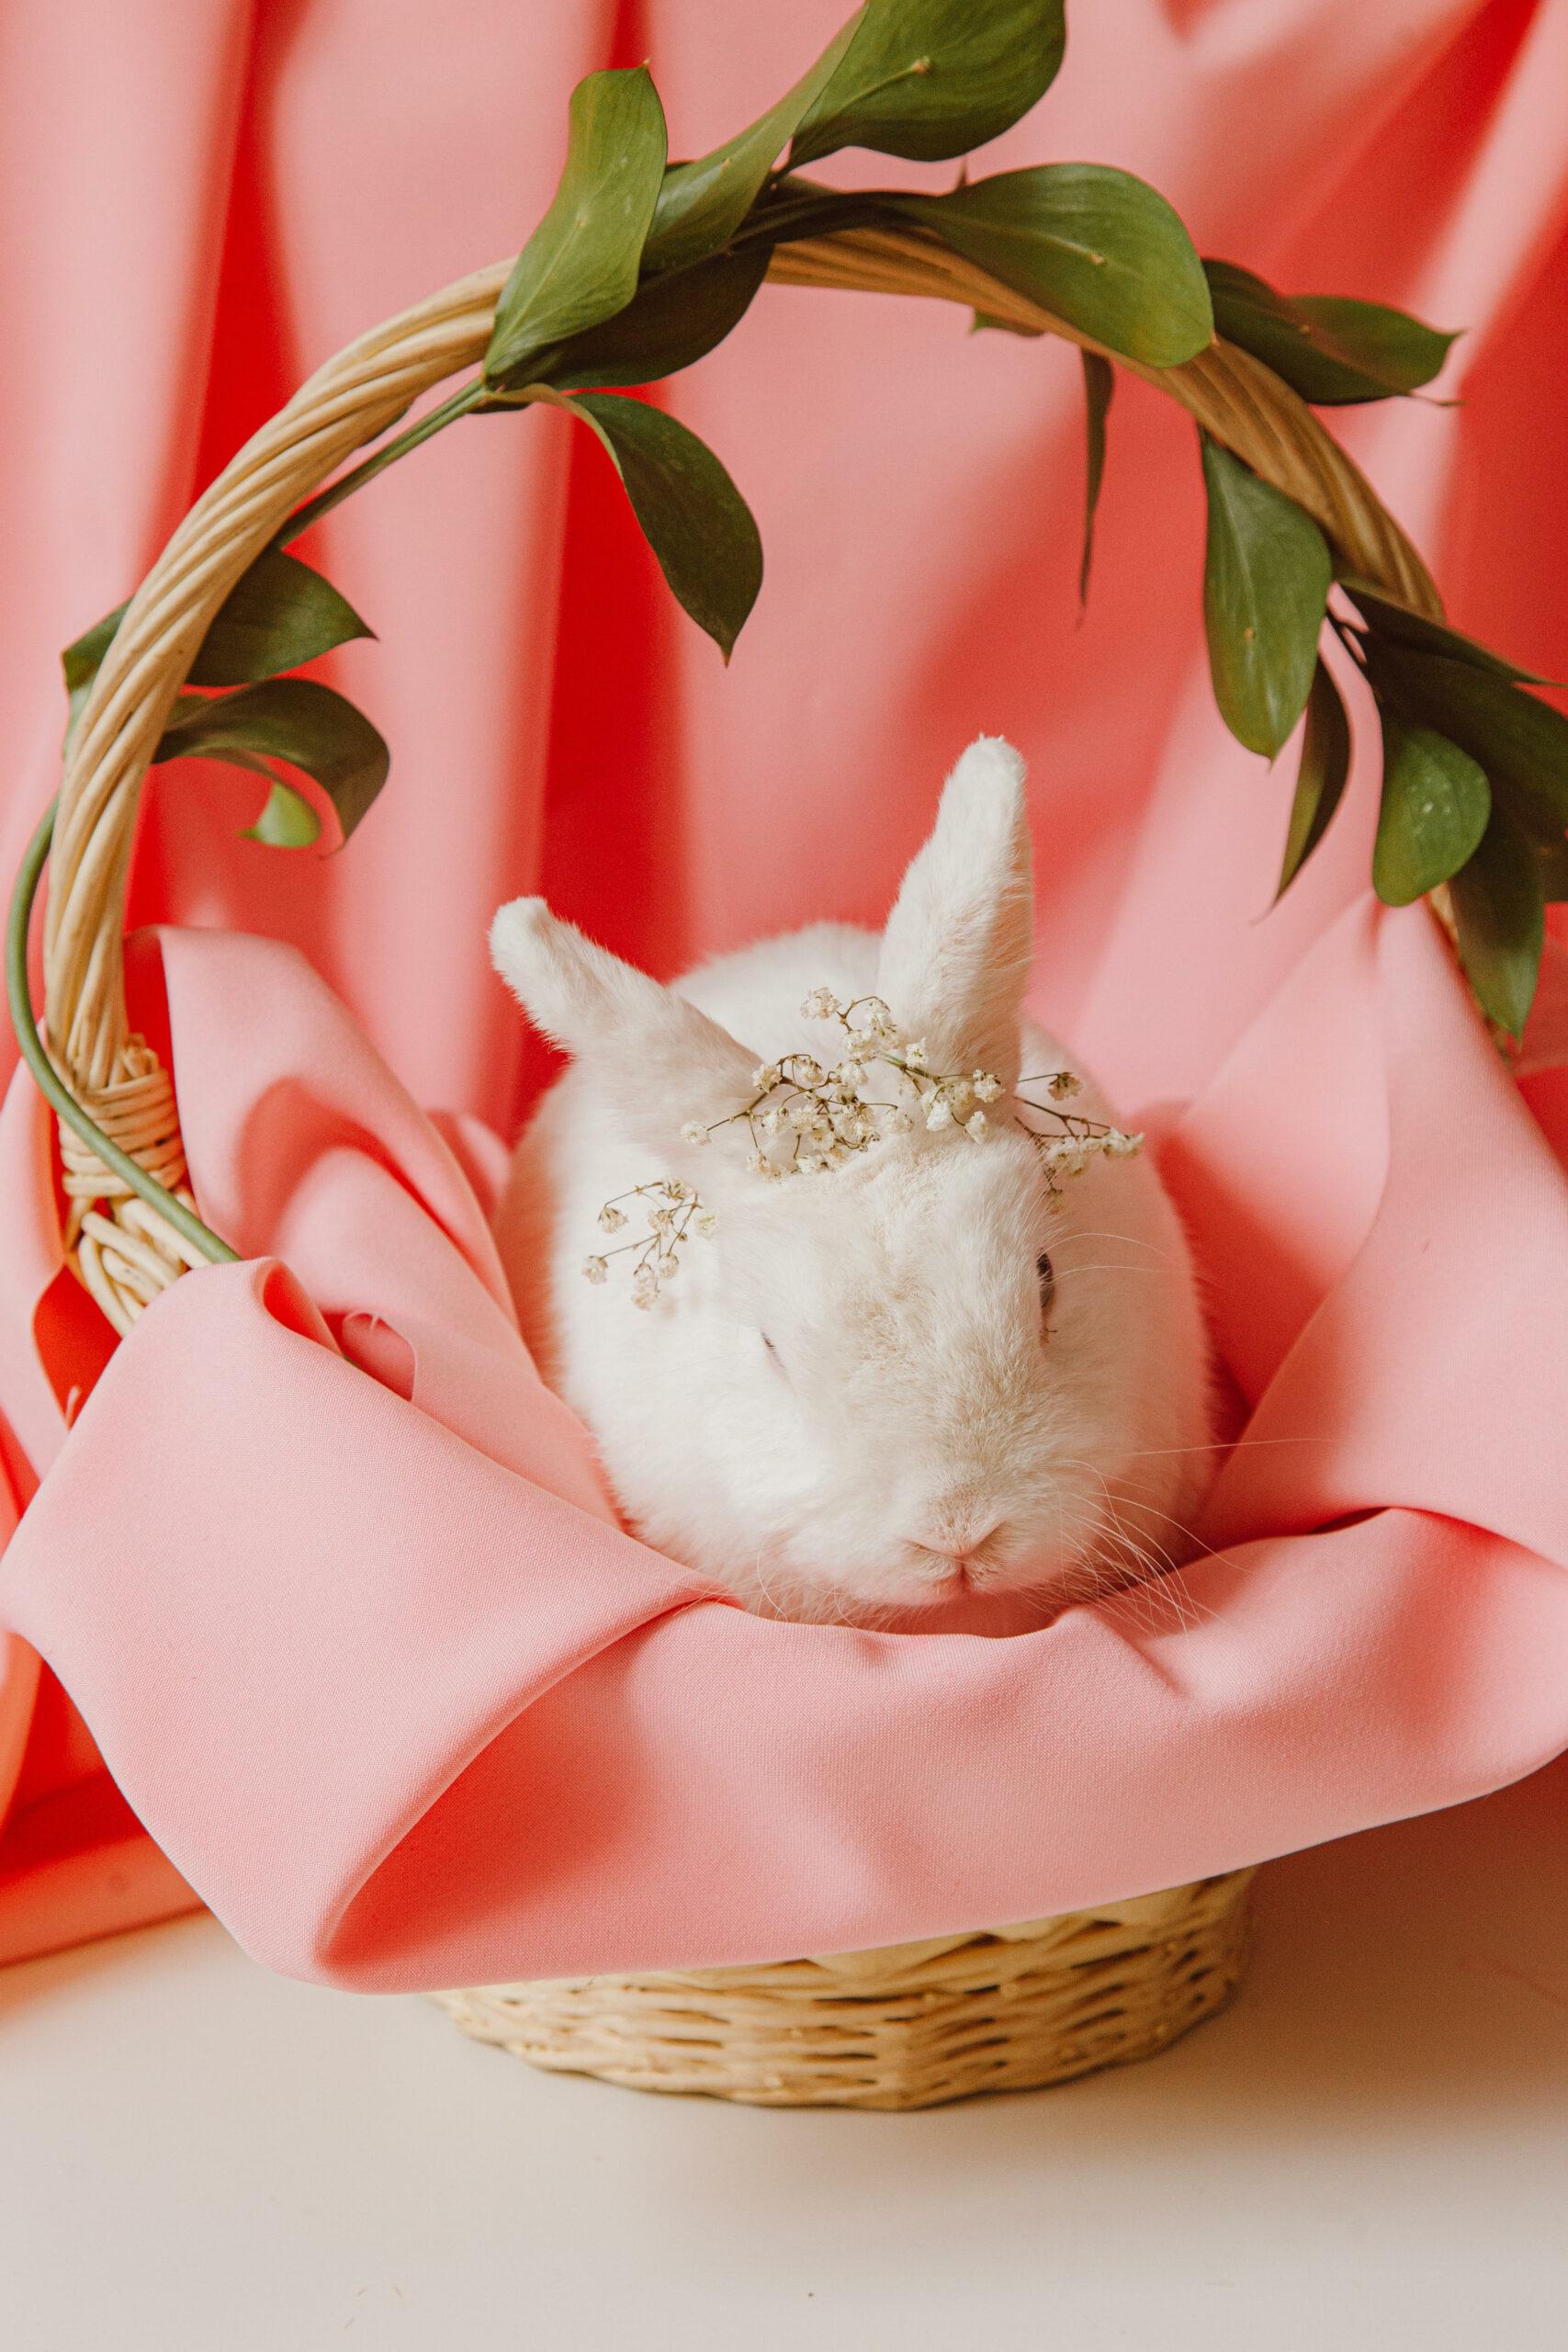 Bunny with baby's breath as a crown in a wicker basket with pink sheets